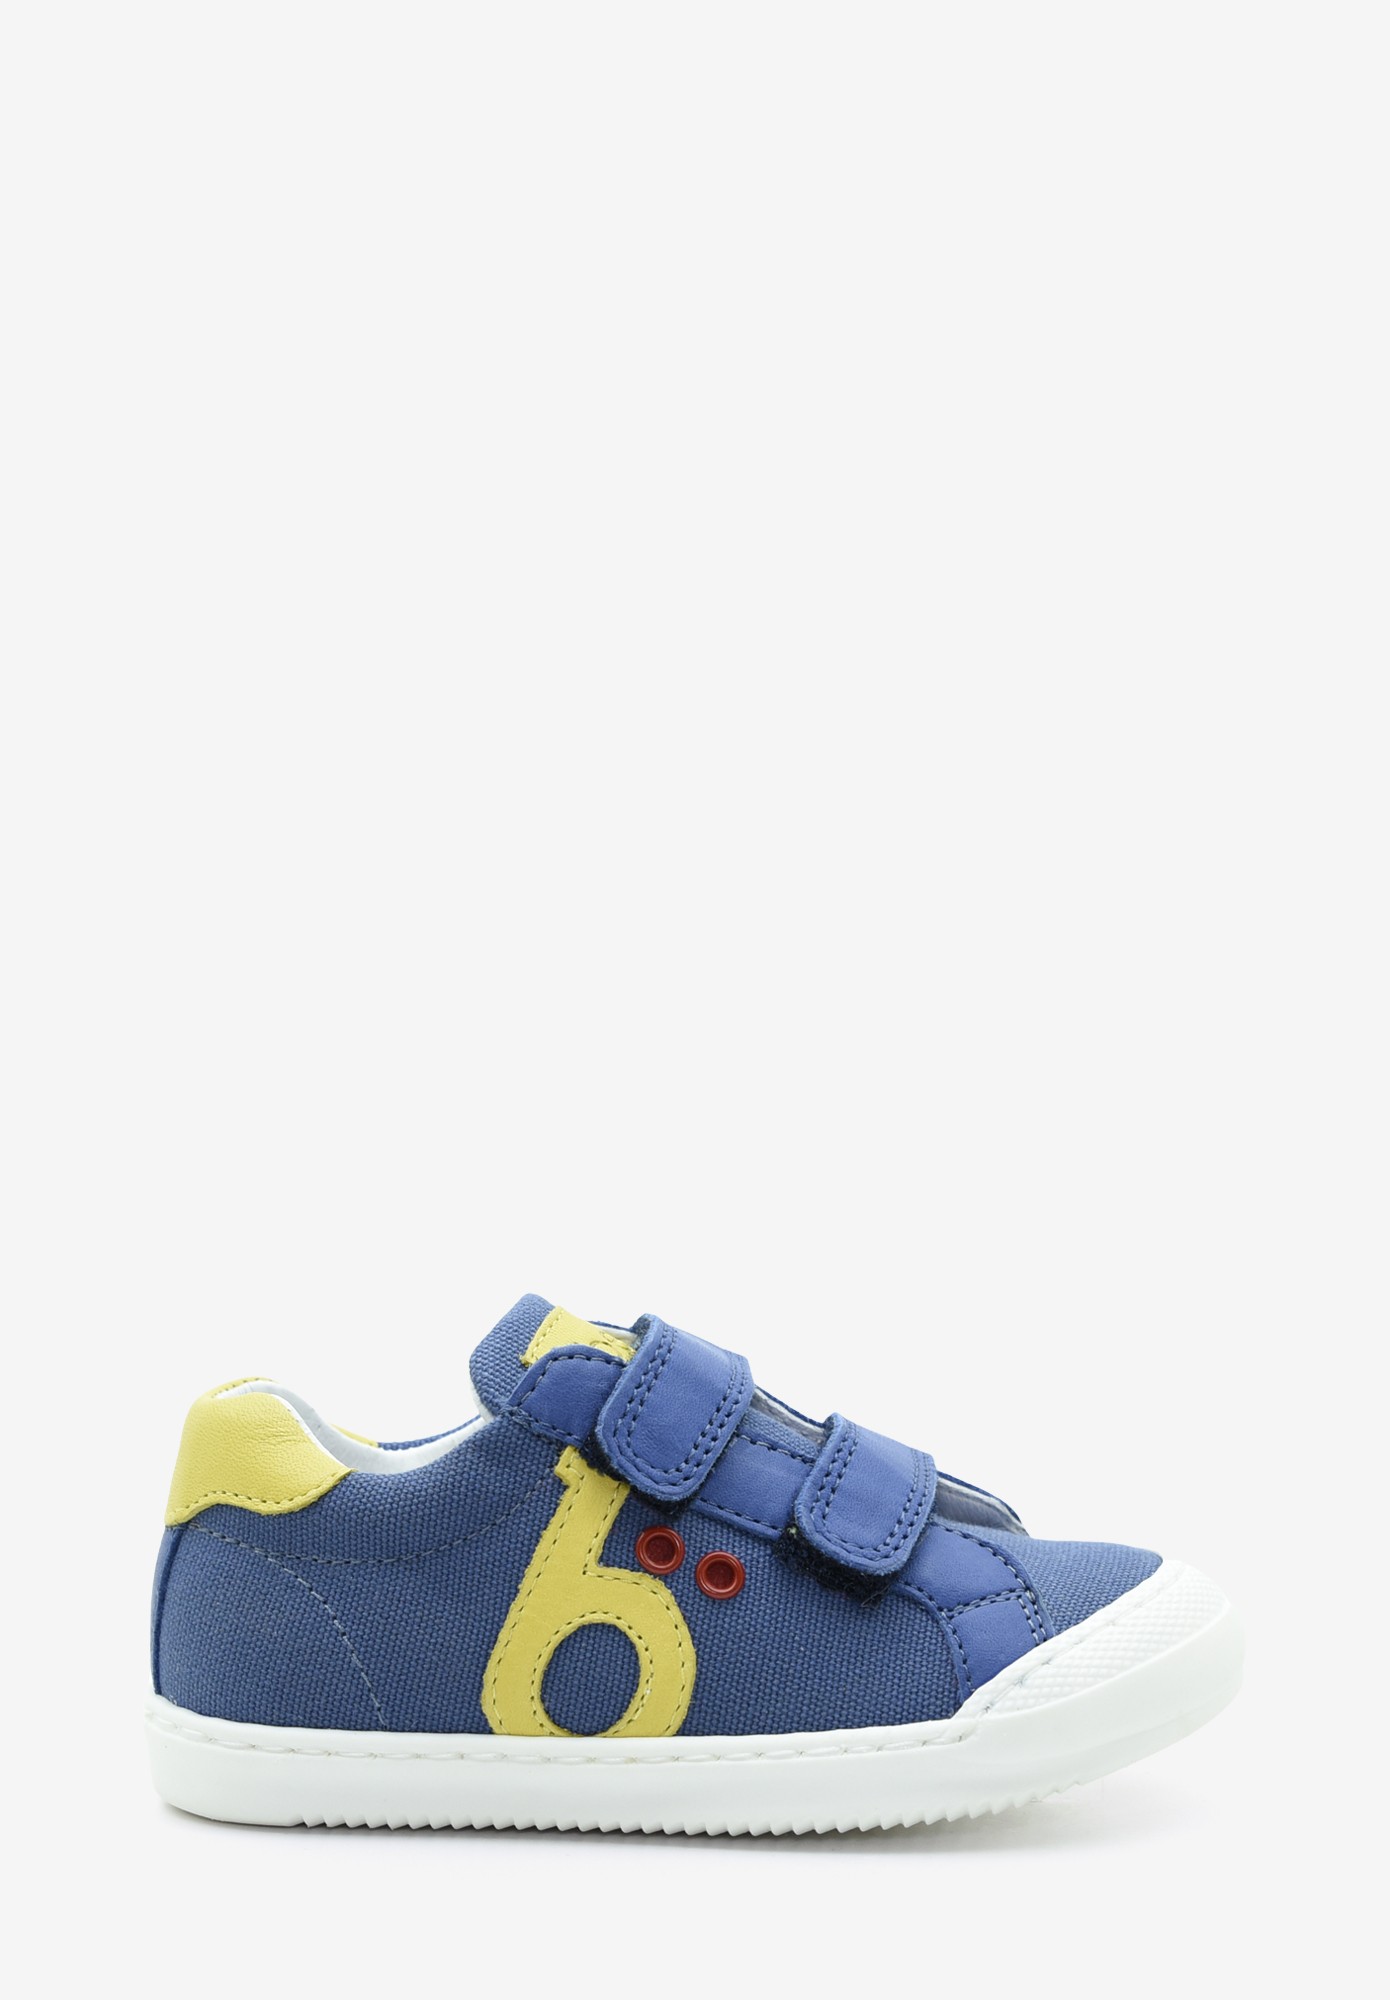 Elm logo Canvas Blue Yellow - Sneakers 